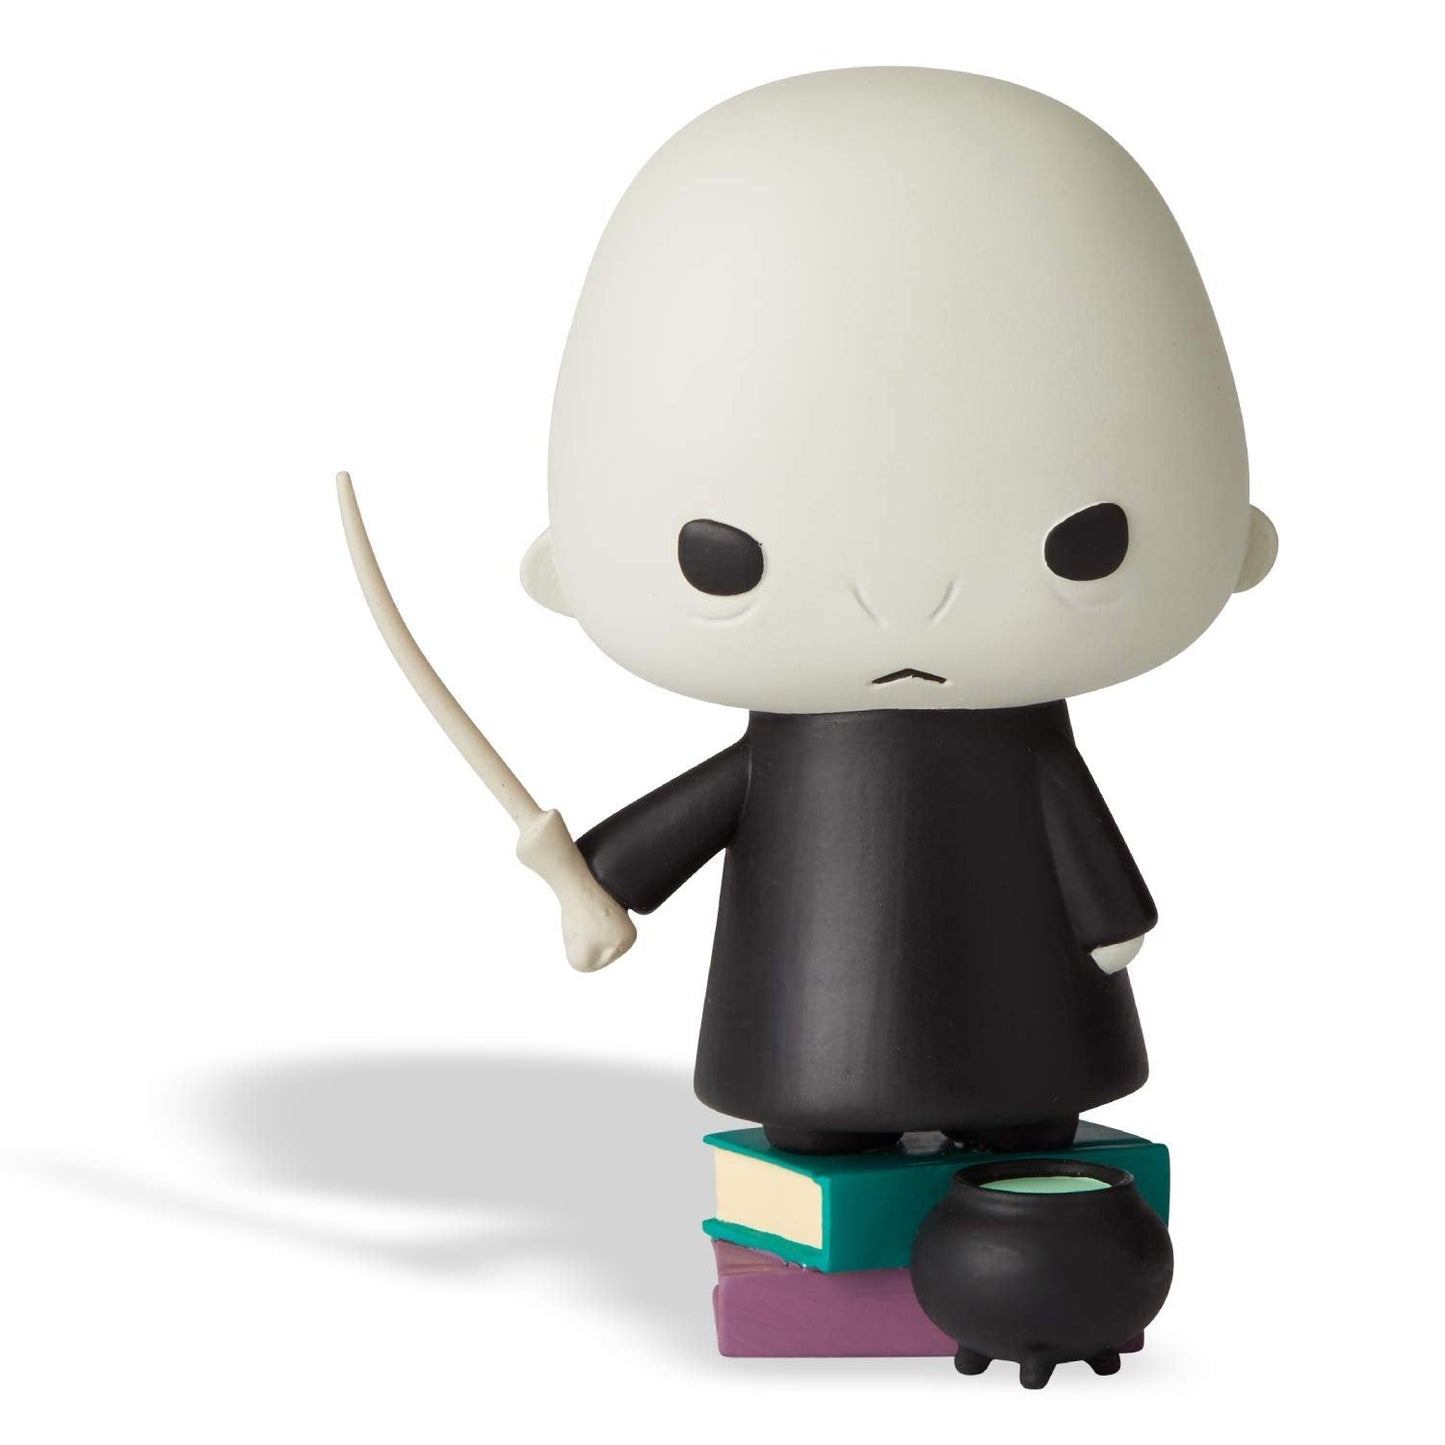 Wizarding World of Harry Potter Little Charms Collection Series 2 Voldemort Figurine, 3.23 Inch